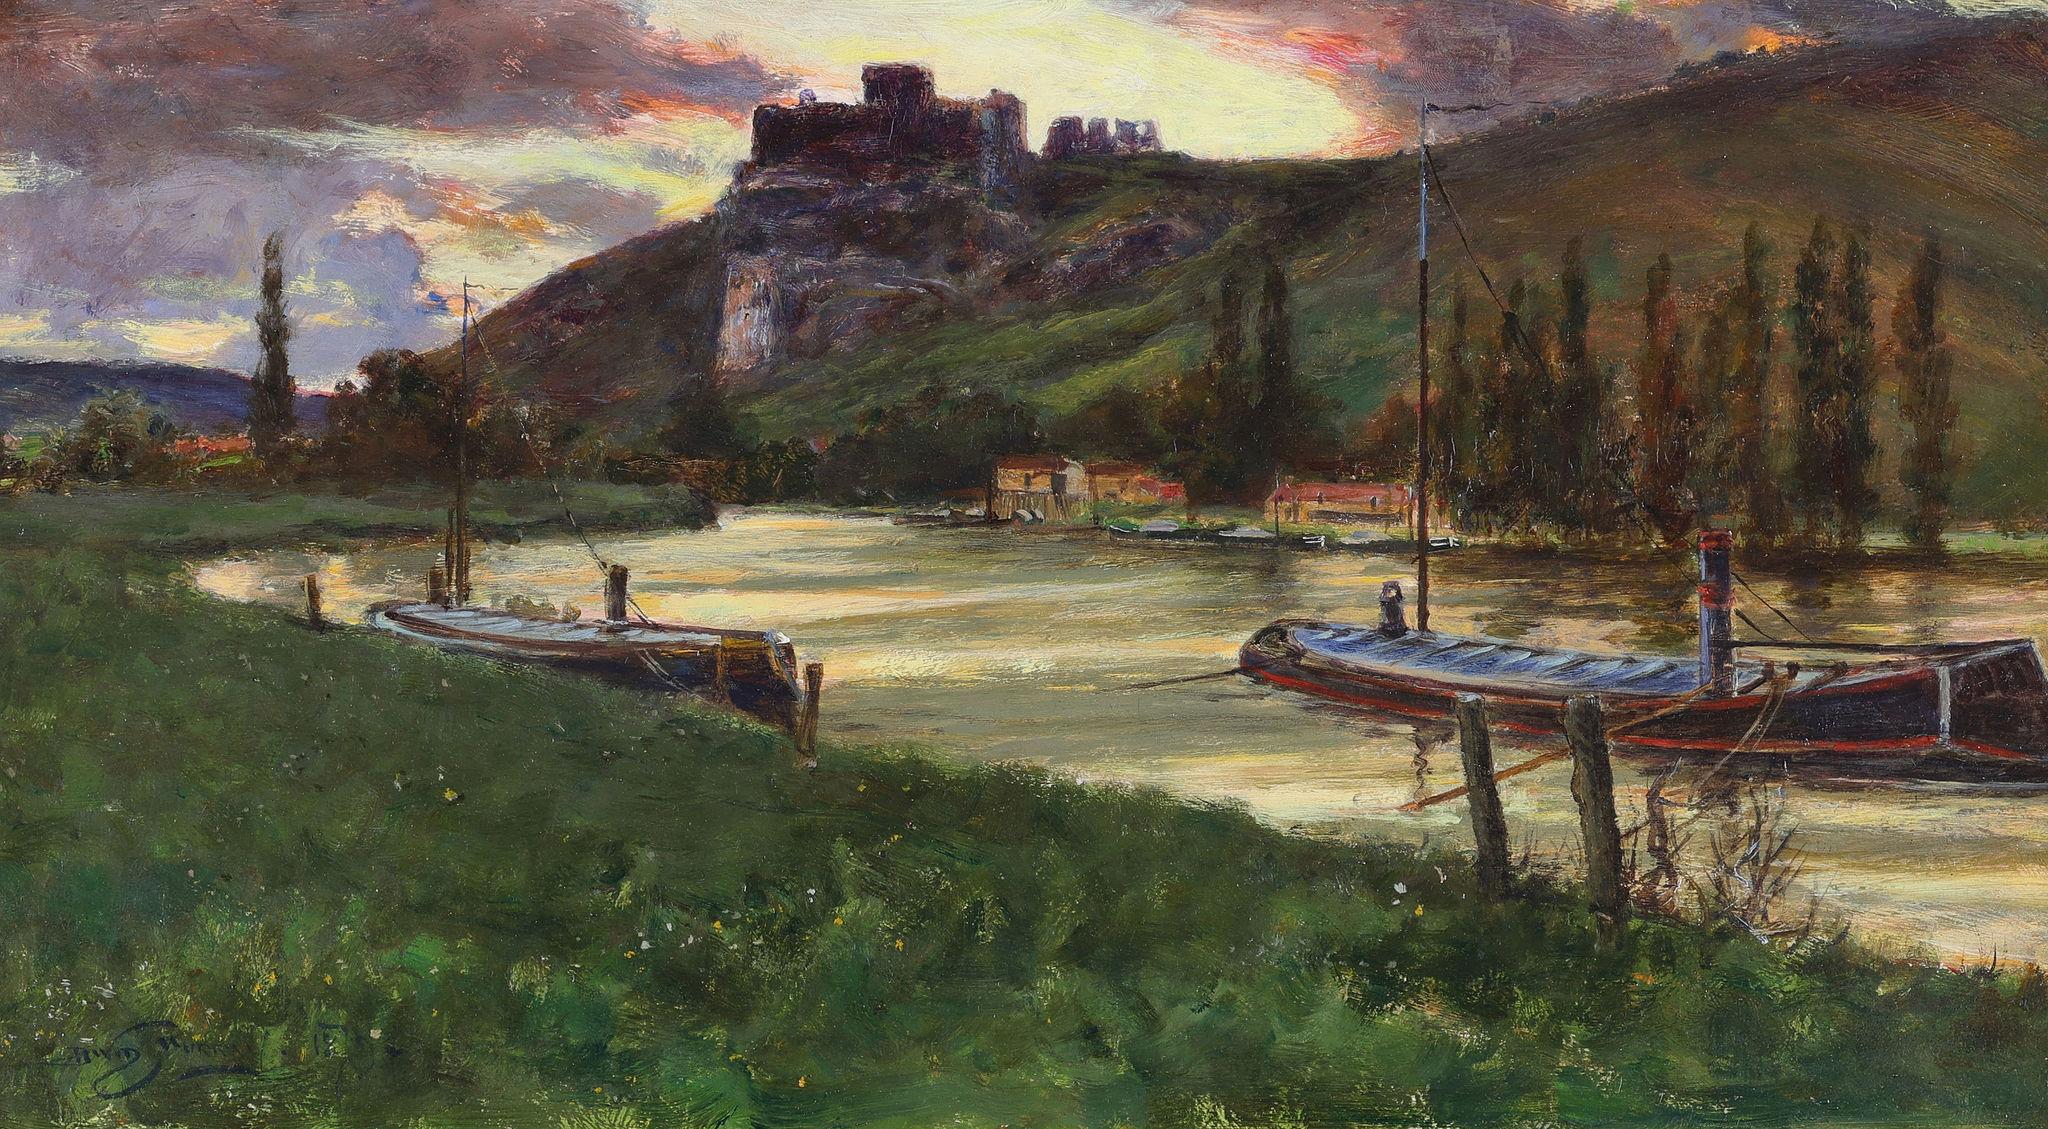 Barges on a River  - Painting by Sir David Murray